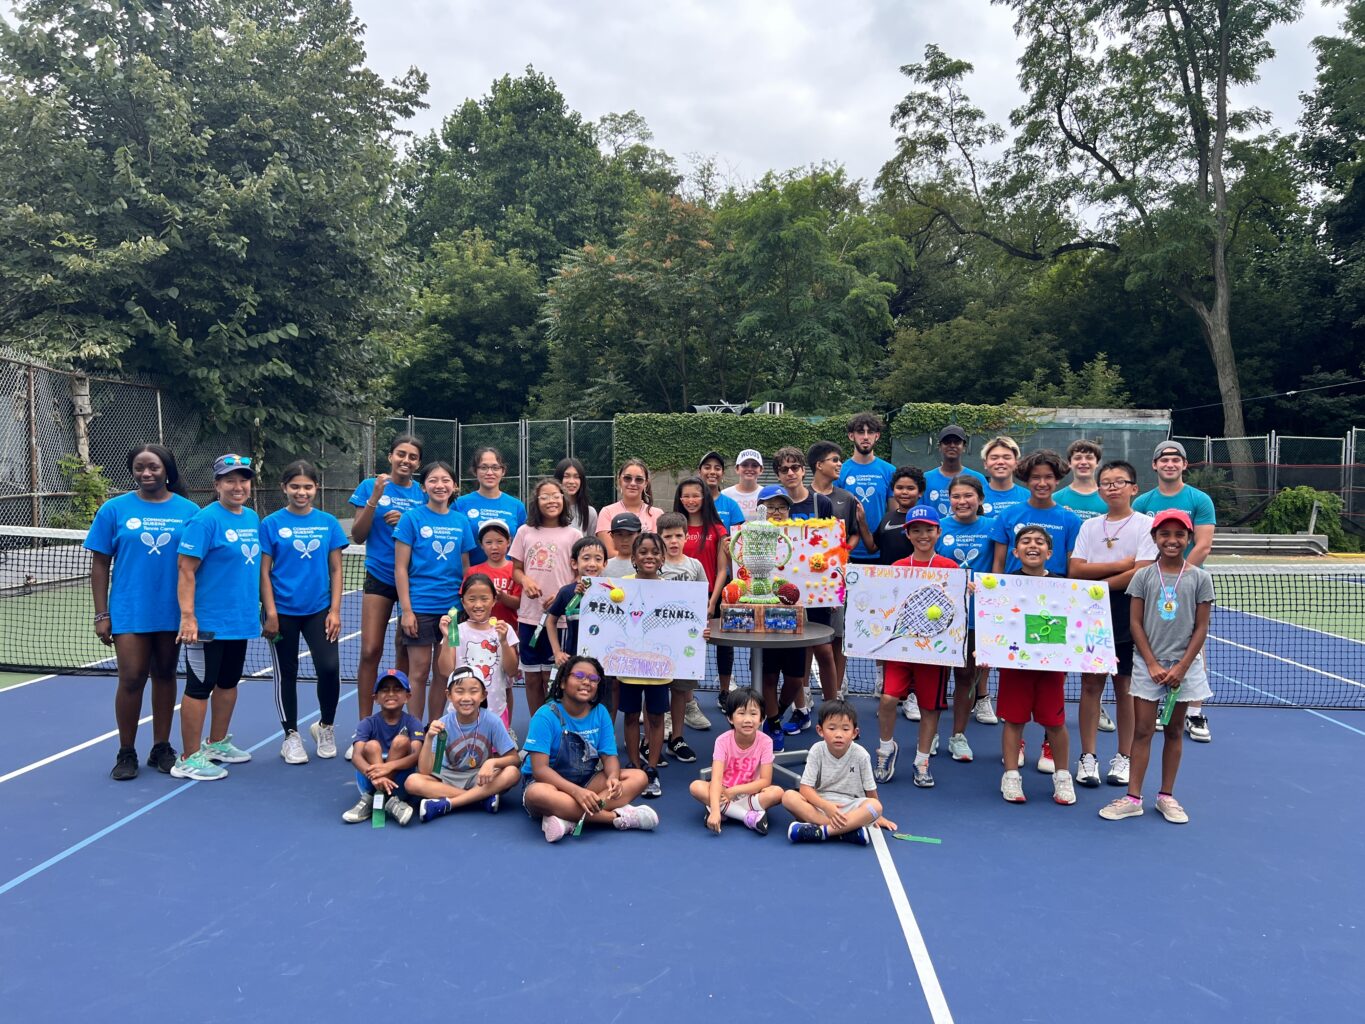 A group of children from Tennis Camp posing for a photo on a tennis court at Alley Pond.